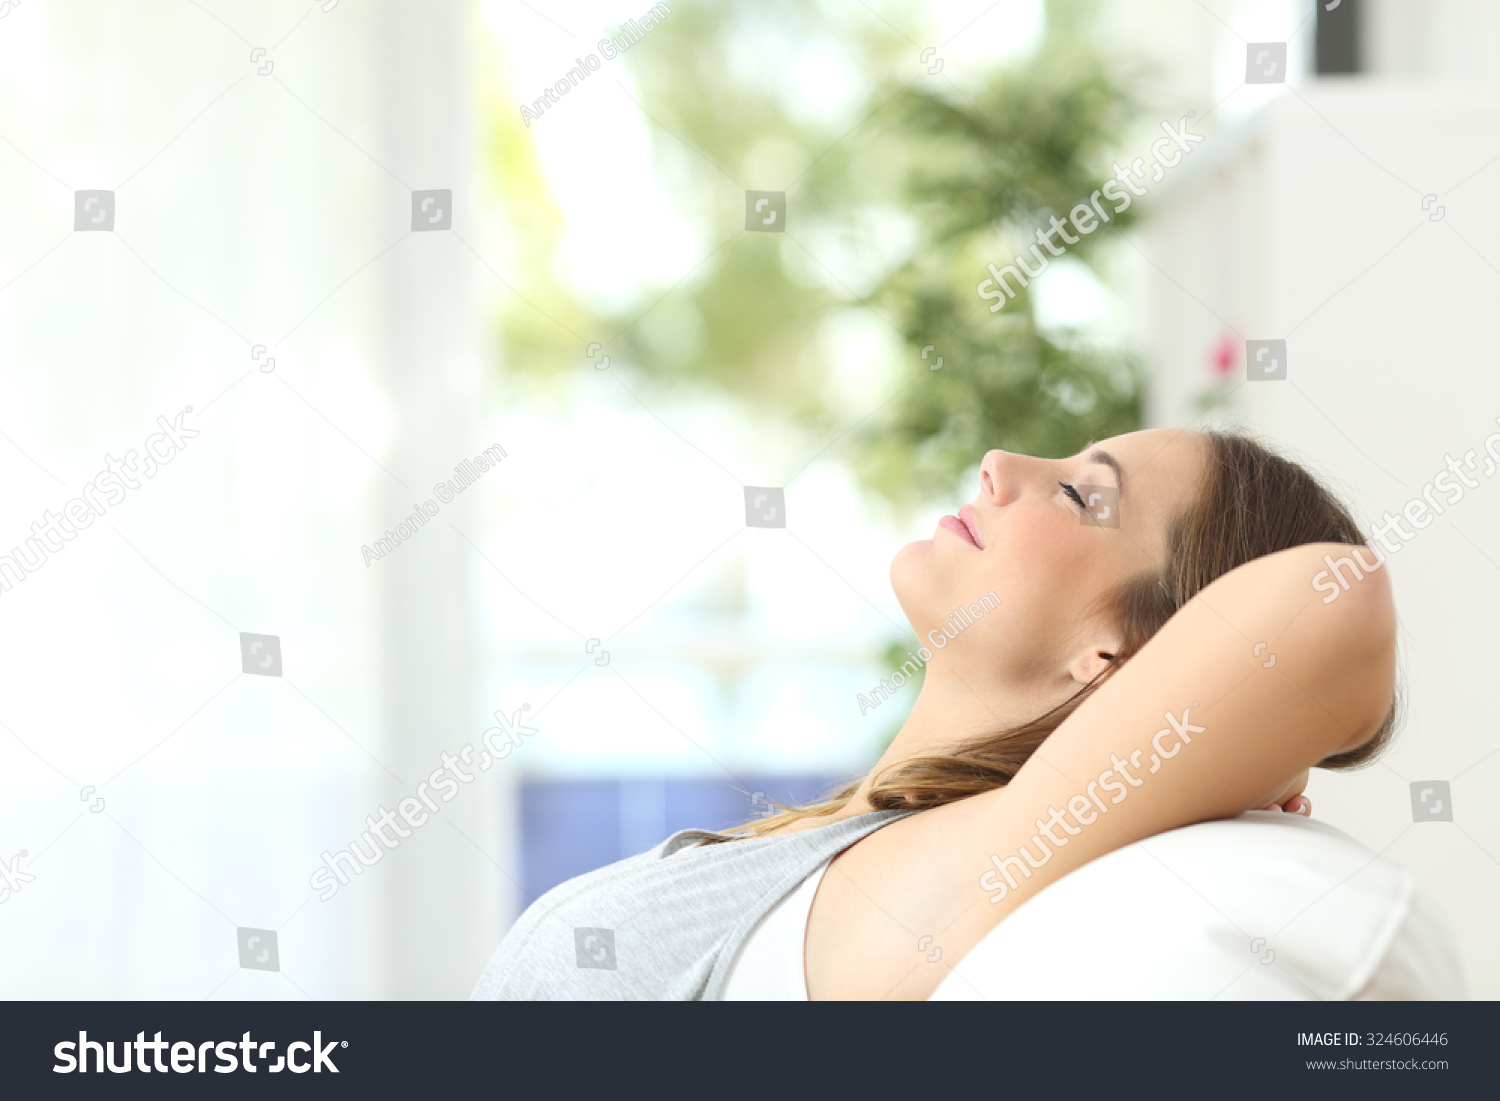 Profile of a beautiful woman relaxing lying on a couch at home #324606446